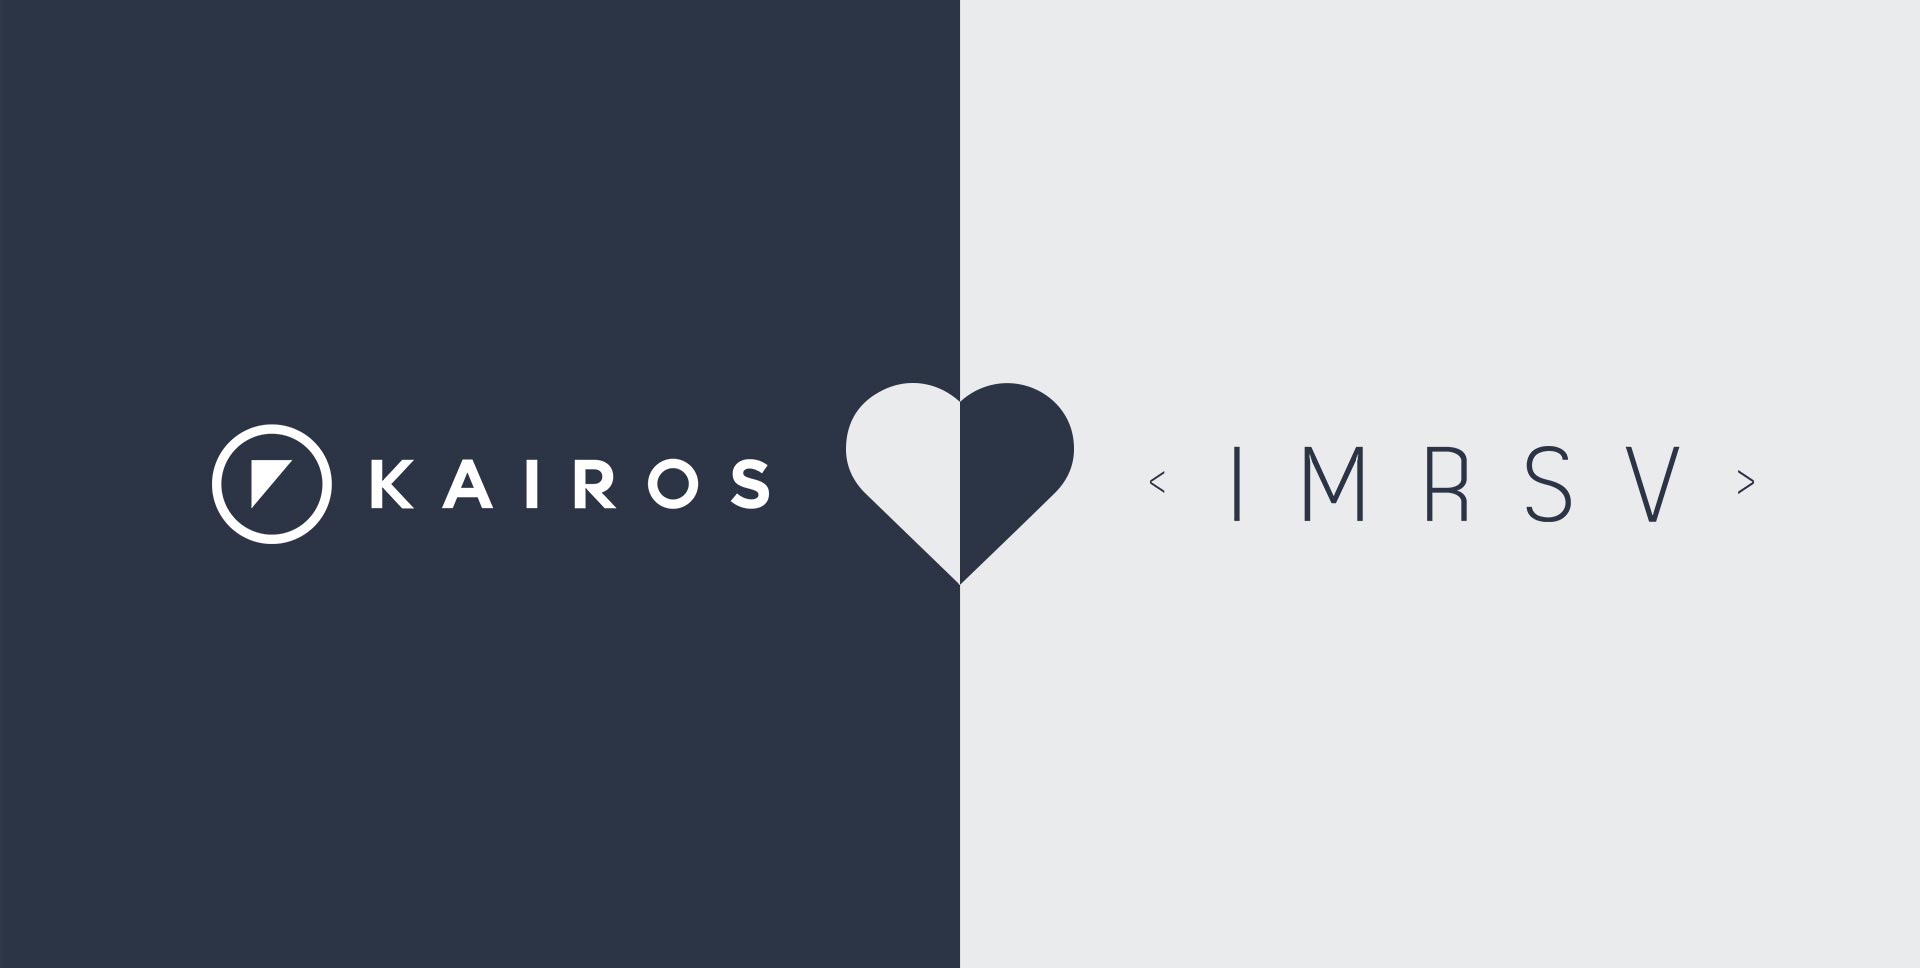 Kairos and IMRSV (Immersive) logos seperated by a heart symbol